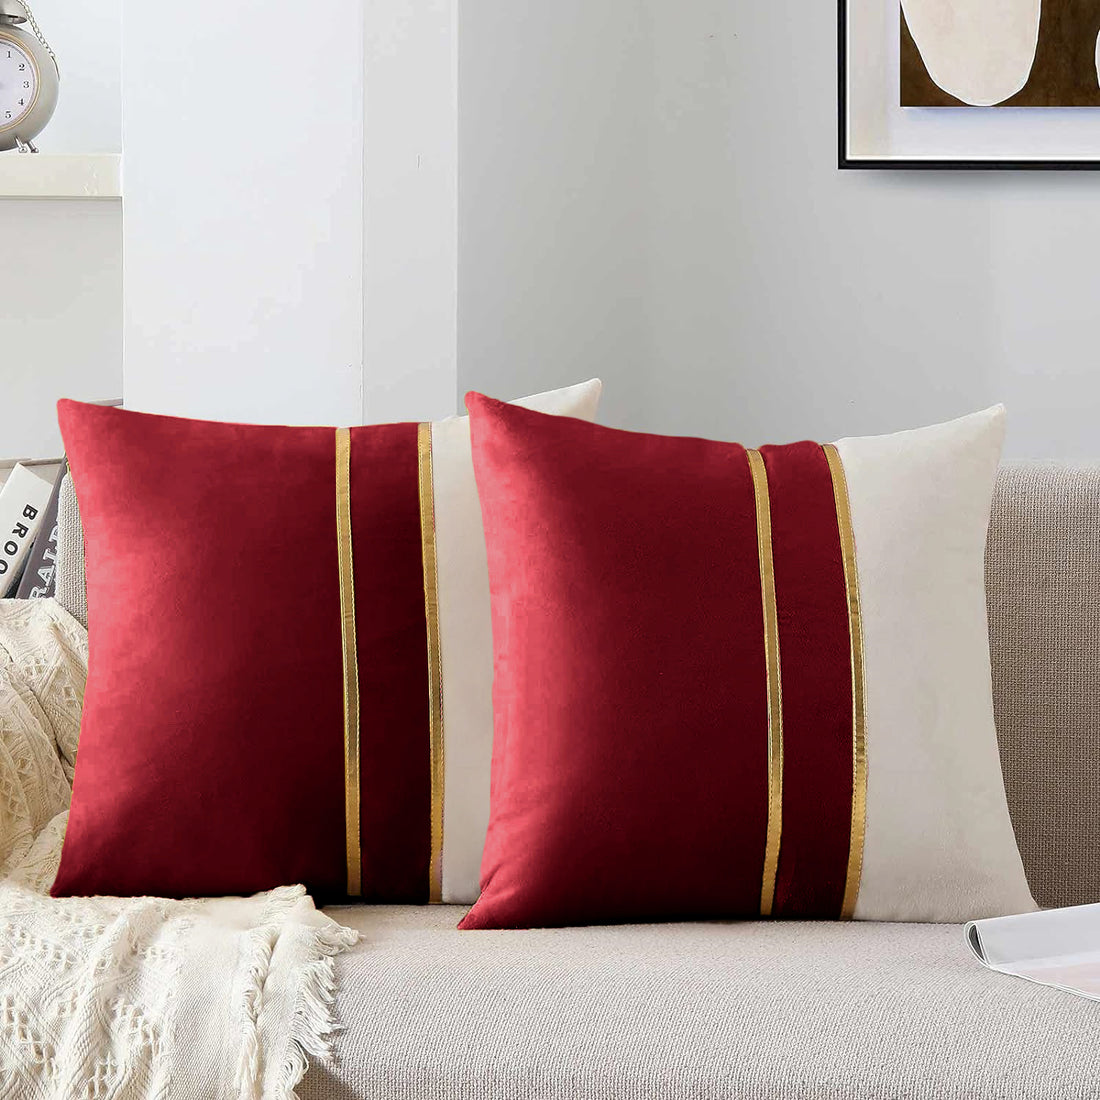 Premium Velvet Set of 2 Decorative Throw Pillow/Cushion Covers with Gold Stripes